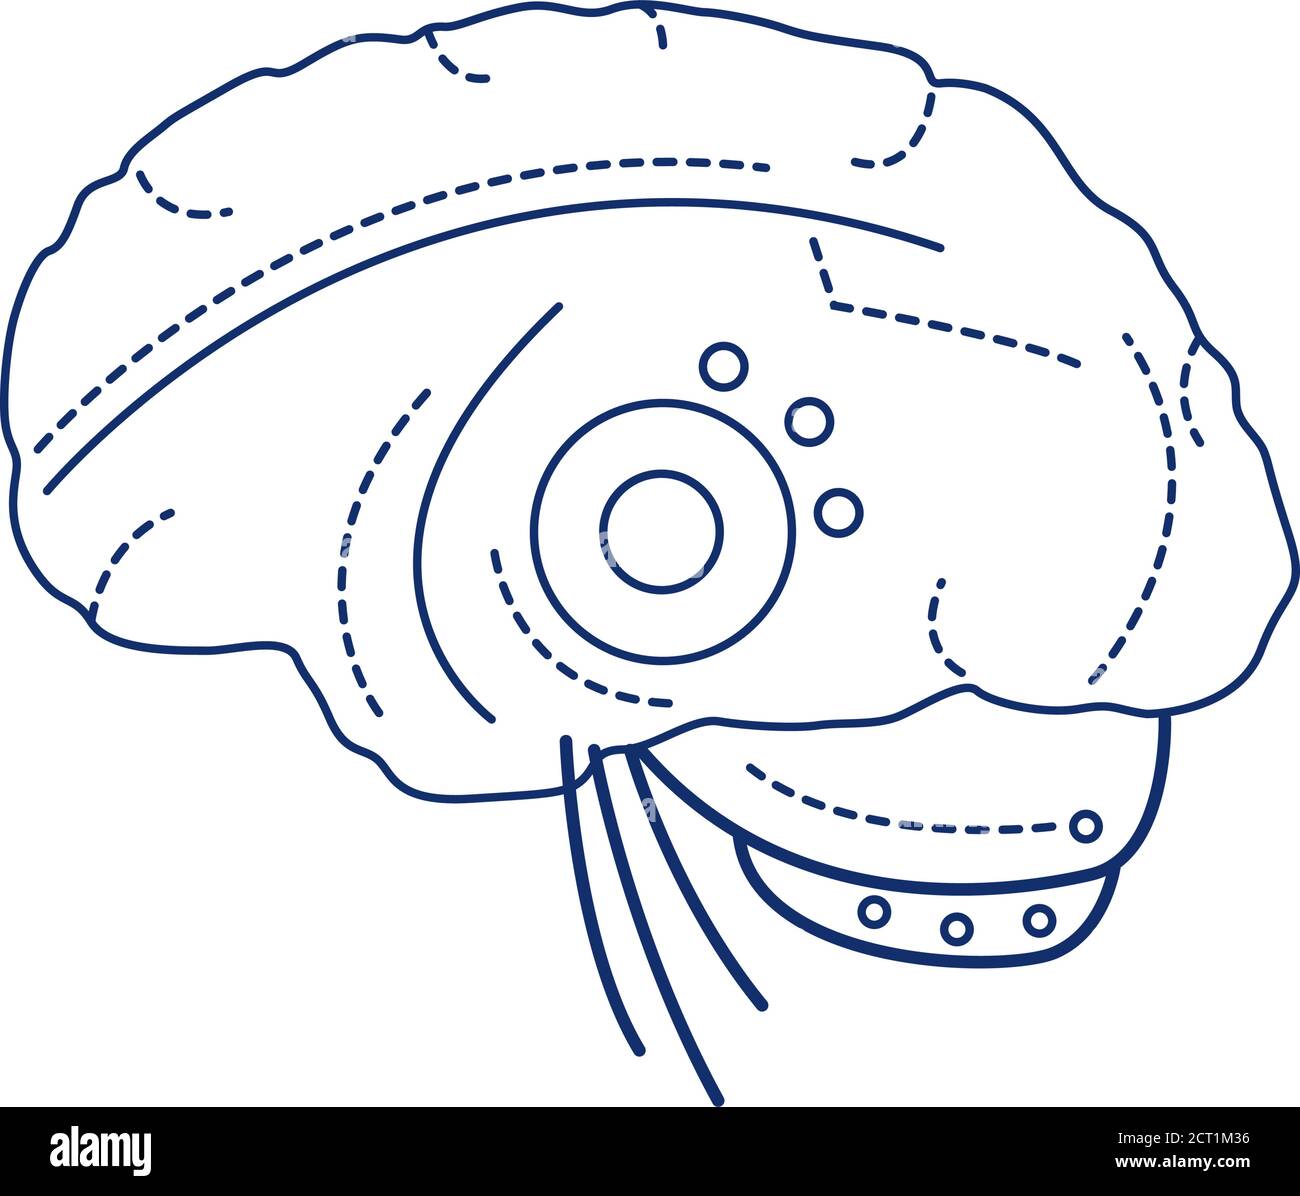 Bio artificial brain black line icon. Software and hardware with cognitive abilities similar to those of human brain. Pictogram for web page, mobile Stock Vector